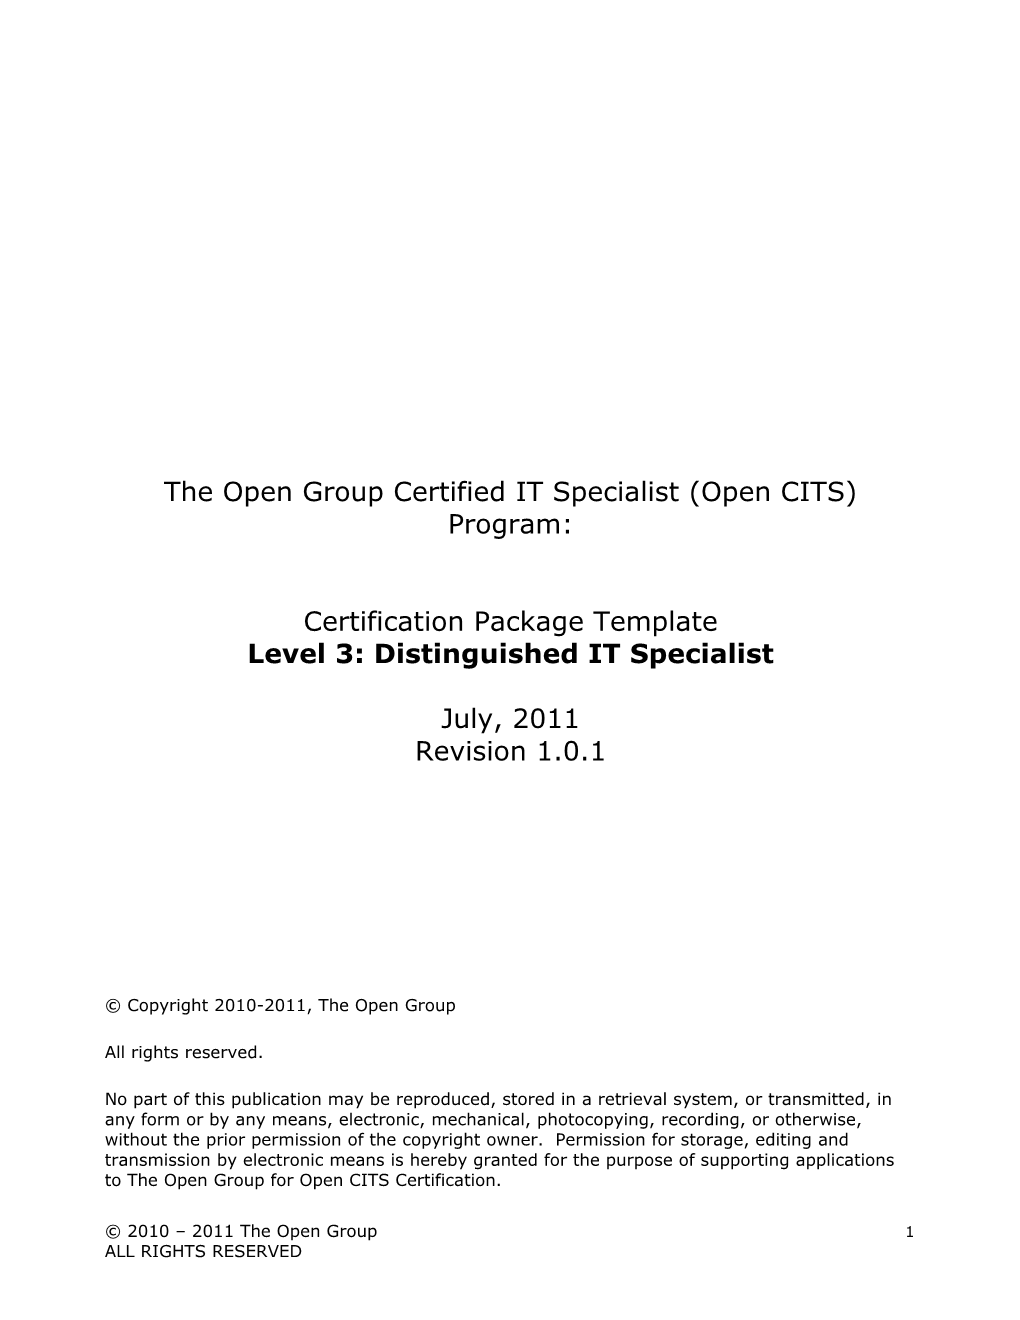 Certification Package Template V2.1 s1